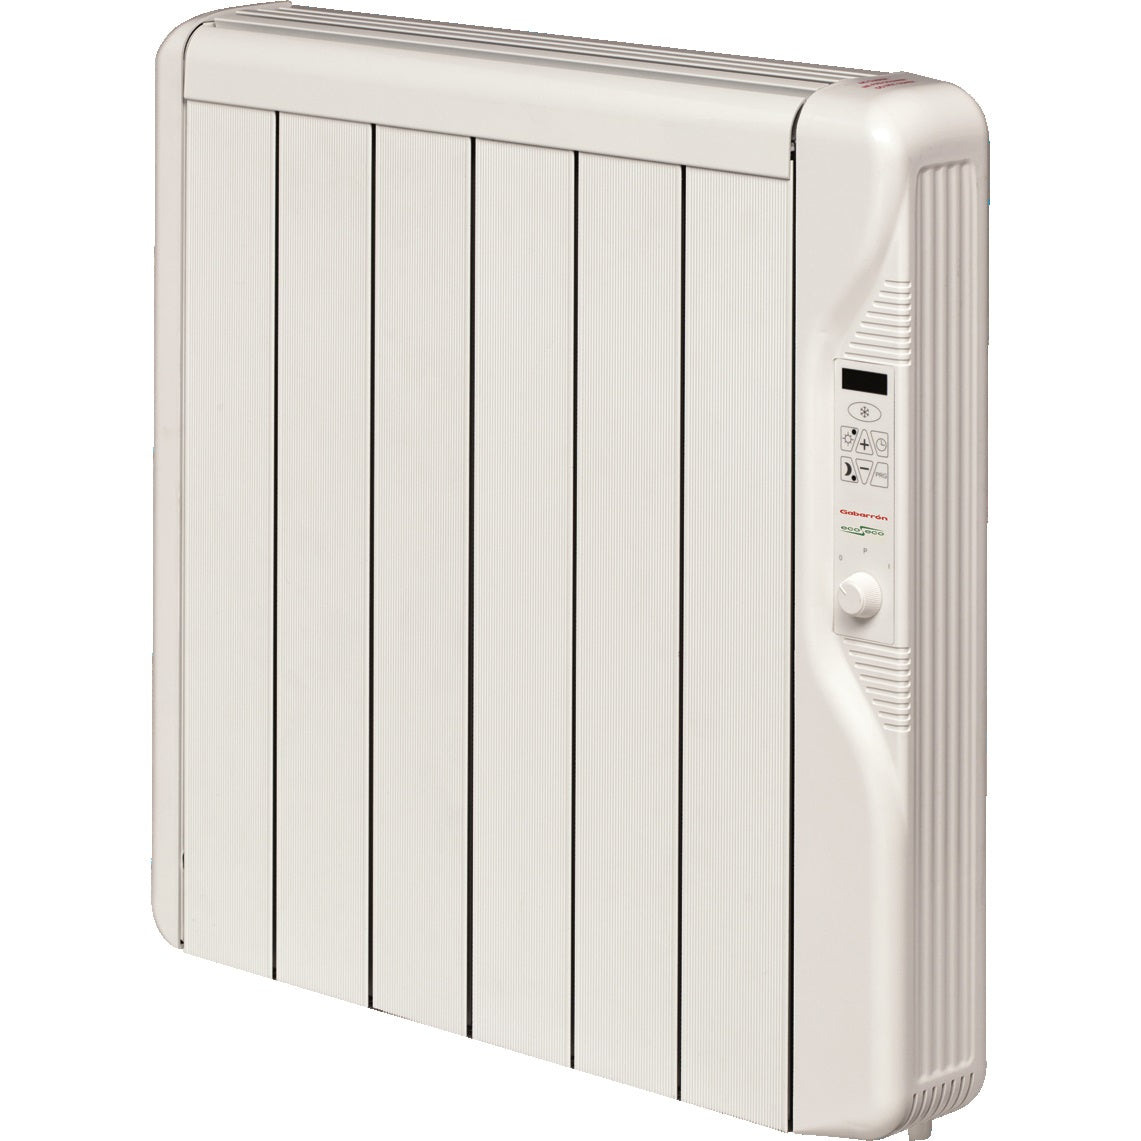 Image of a Elnur 750W (0.75kW) Oil Free Electric Radiators with Digital Control & Timer on a white background